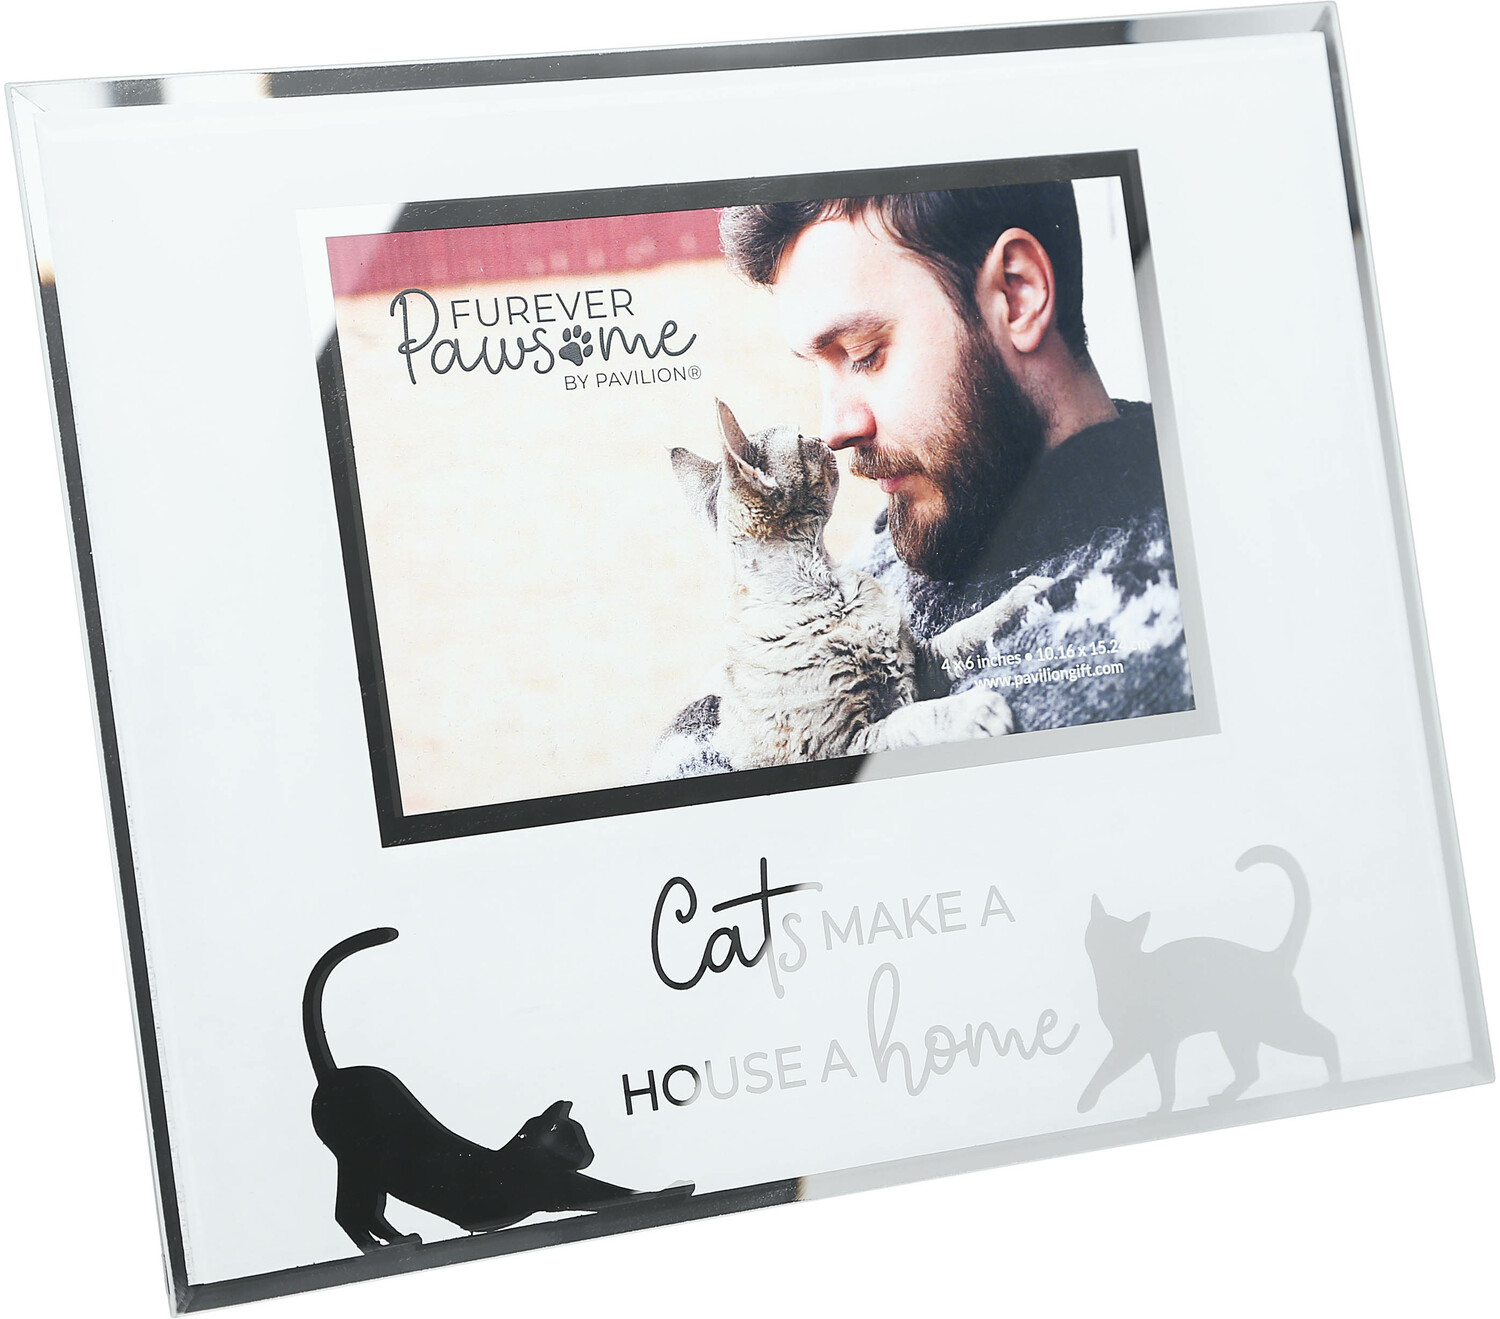 Cats by Furever Pawsome - Cats - 9.25" x 7.25" Frame
(Holds 6" x 4" Photo)